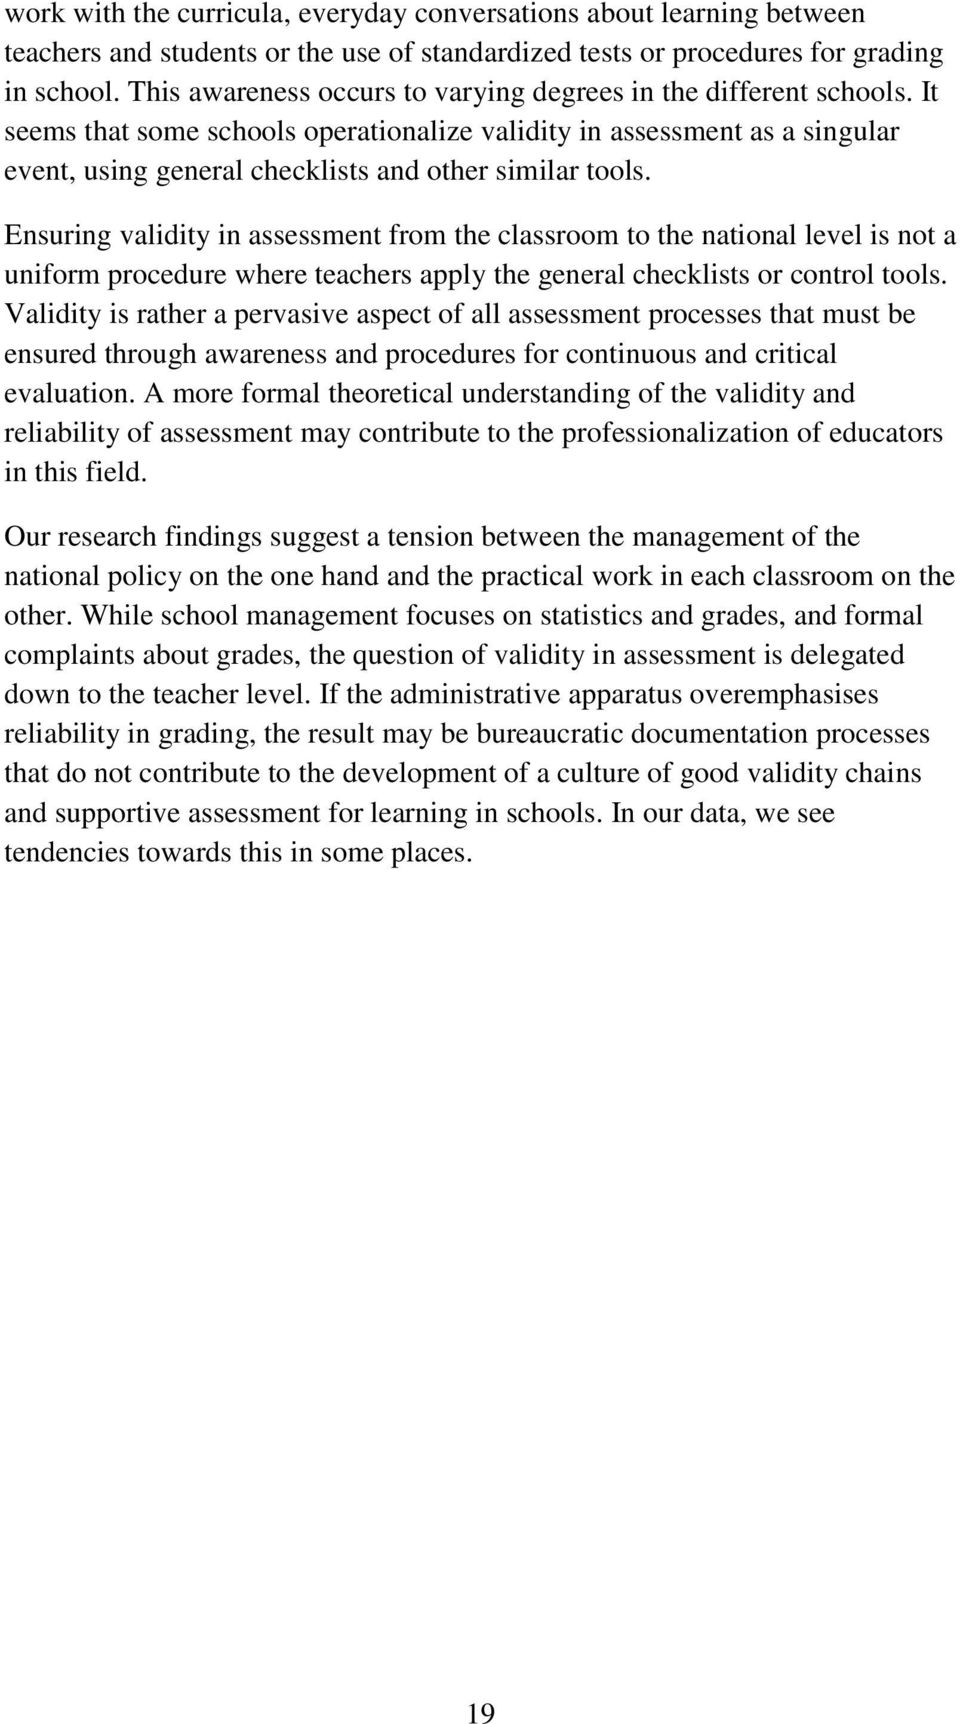 It seems that some schools operationalize validity in assessment as a singular event, using general checklists and other similar tools.